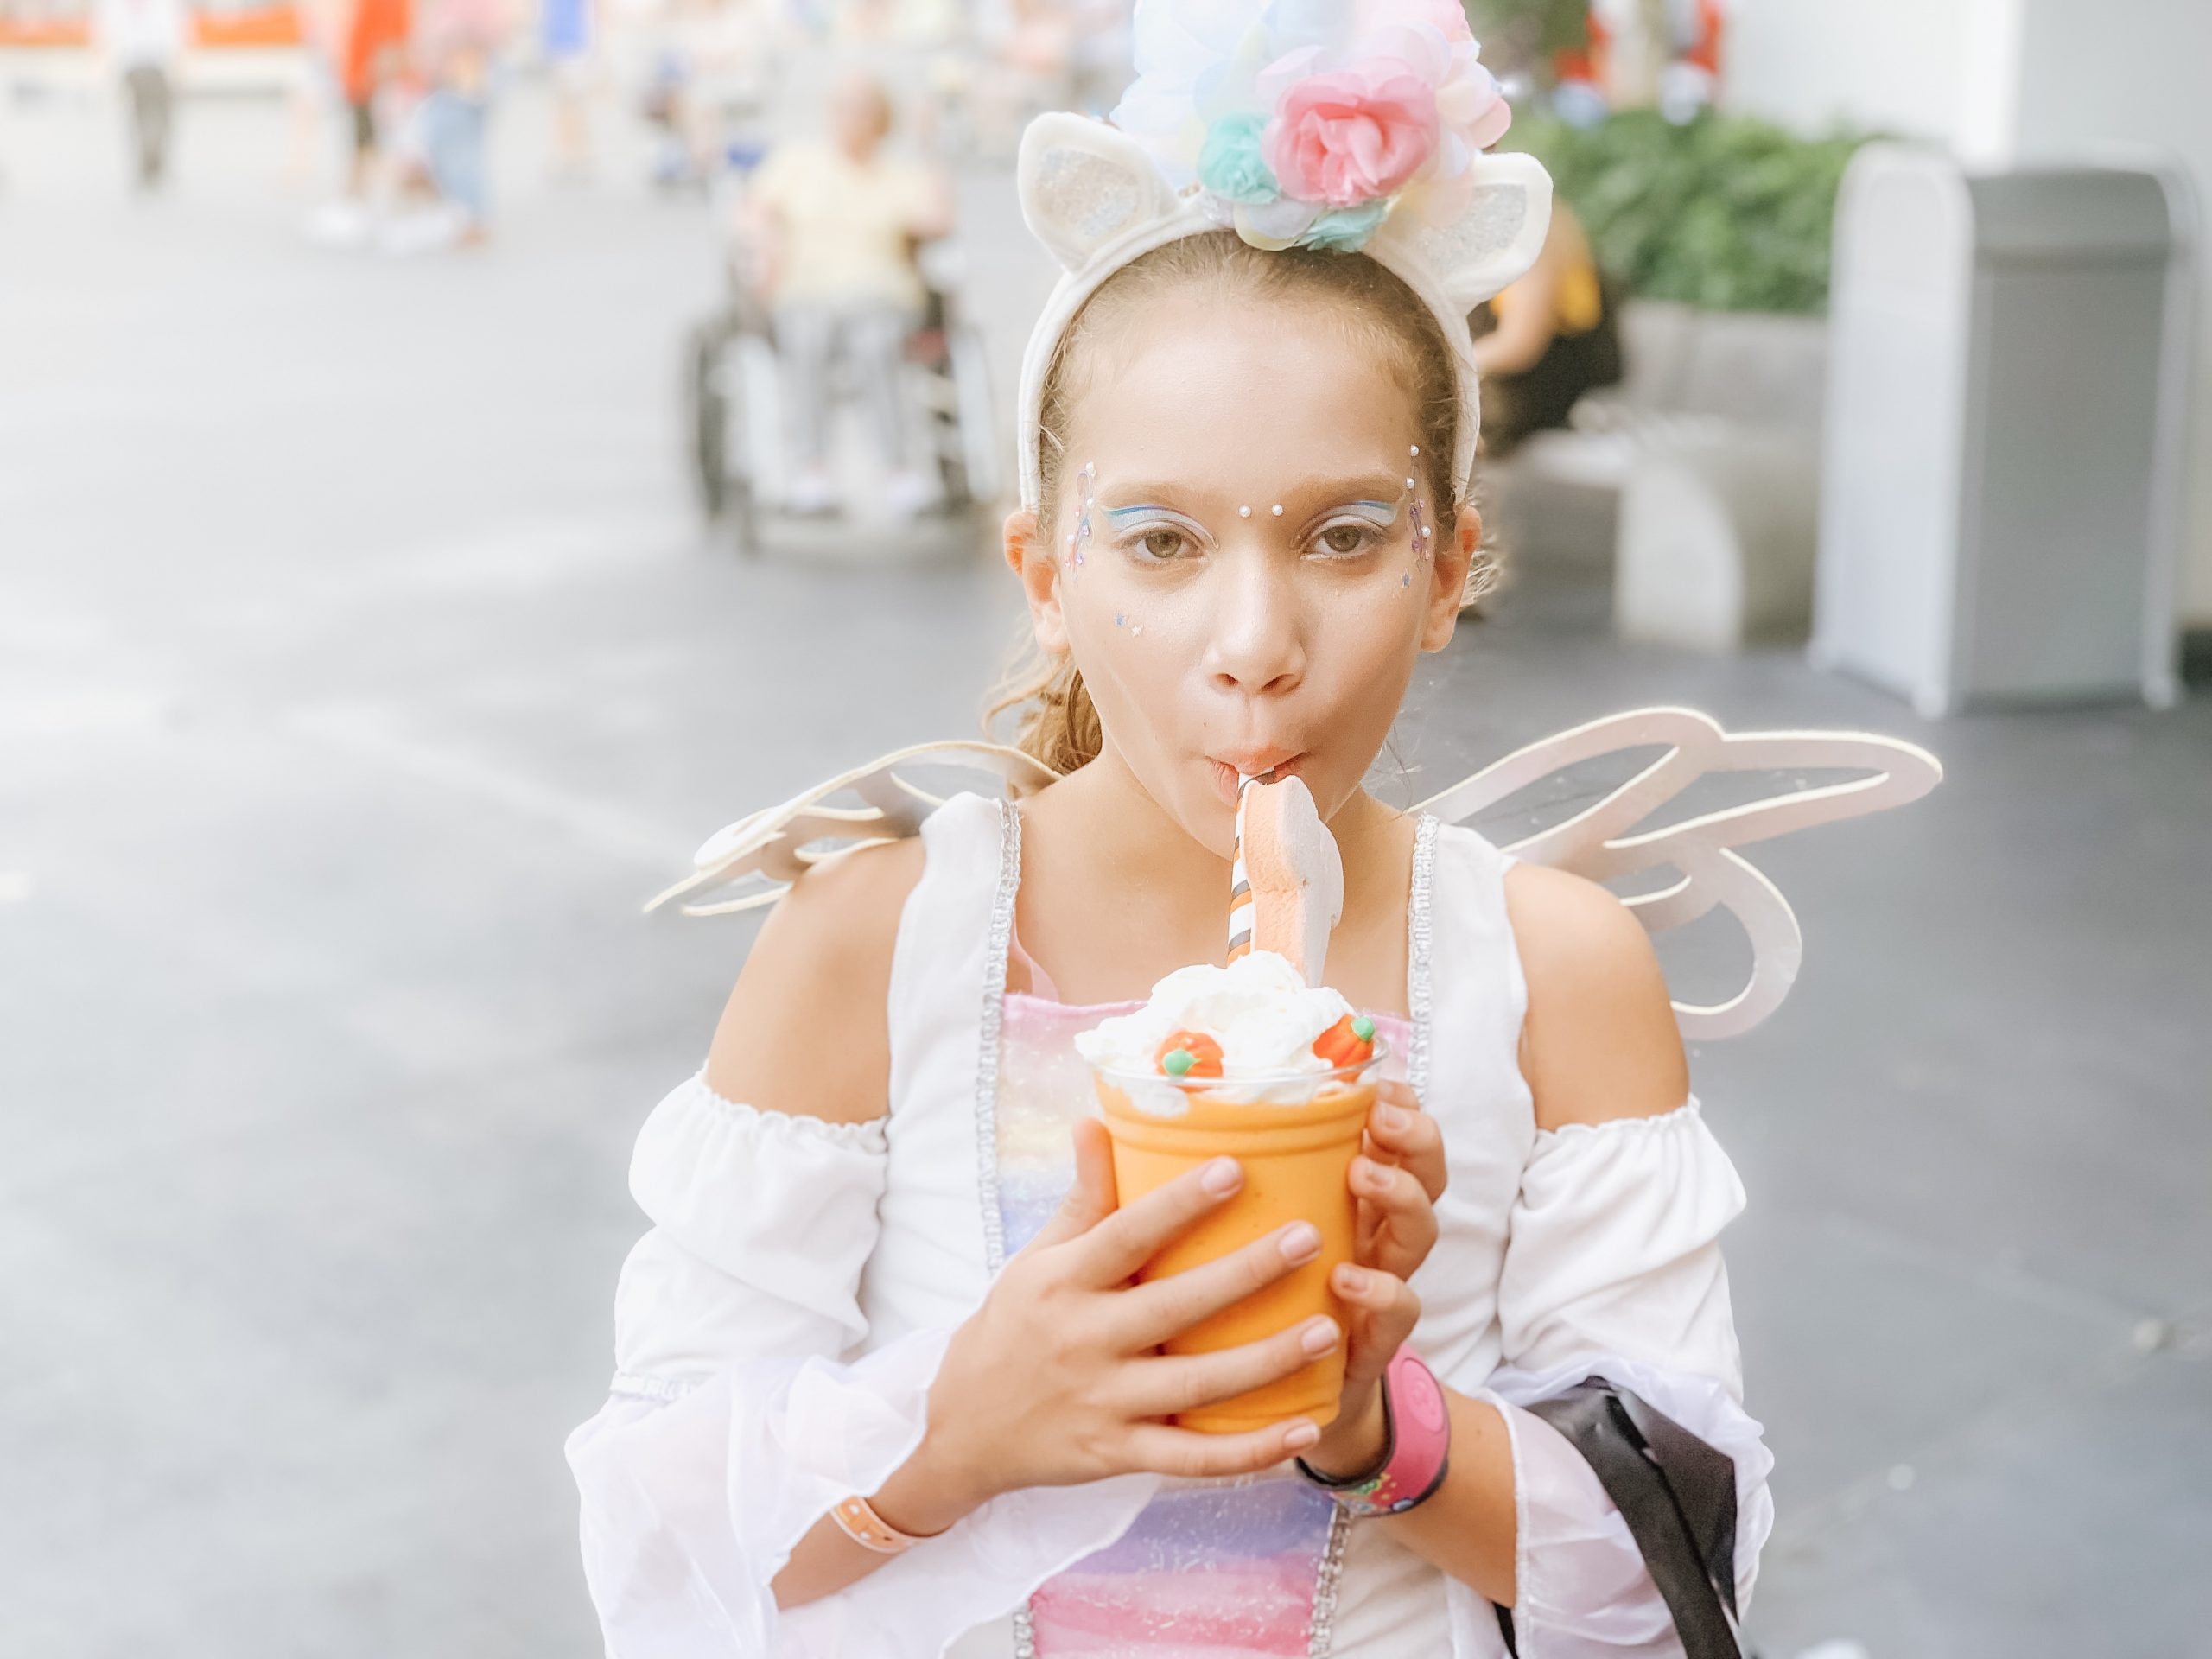 Mobile Order in Walt Disney World: Everything You Need to Know